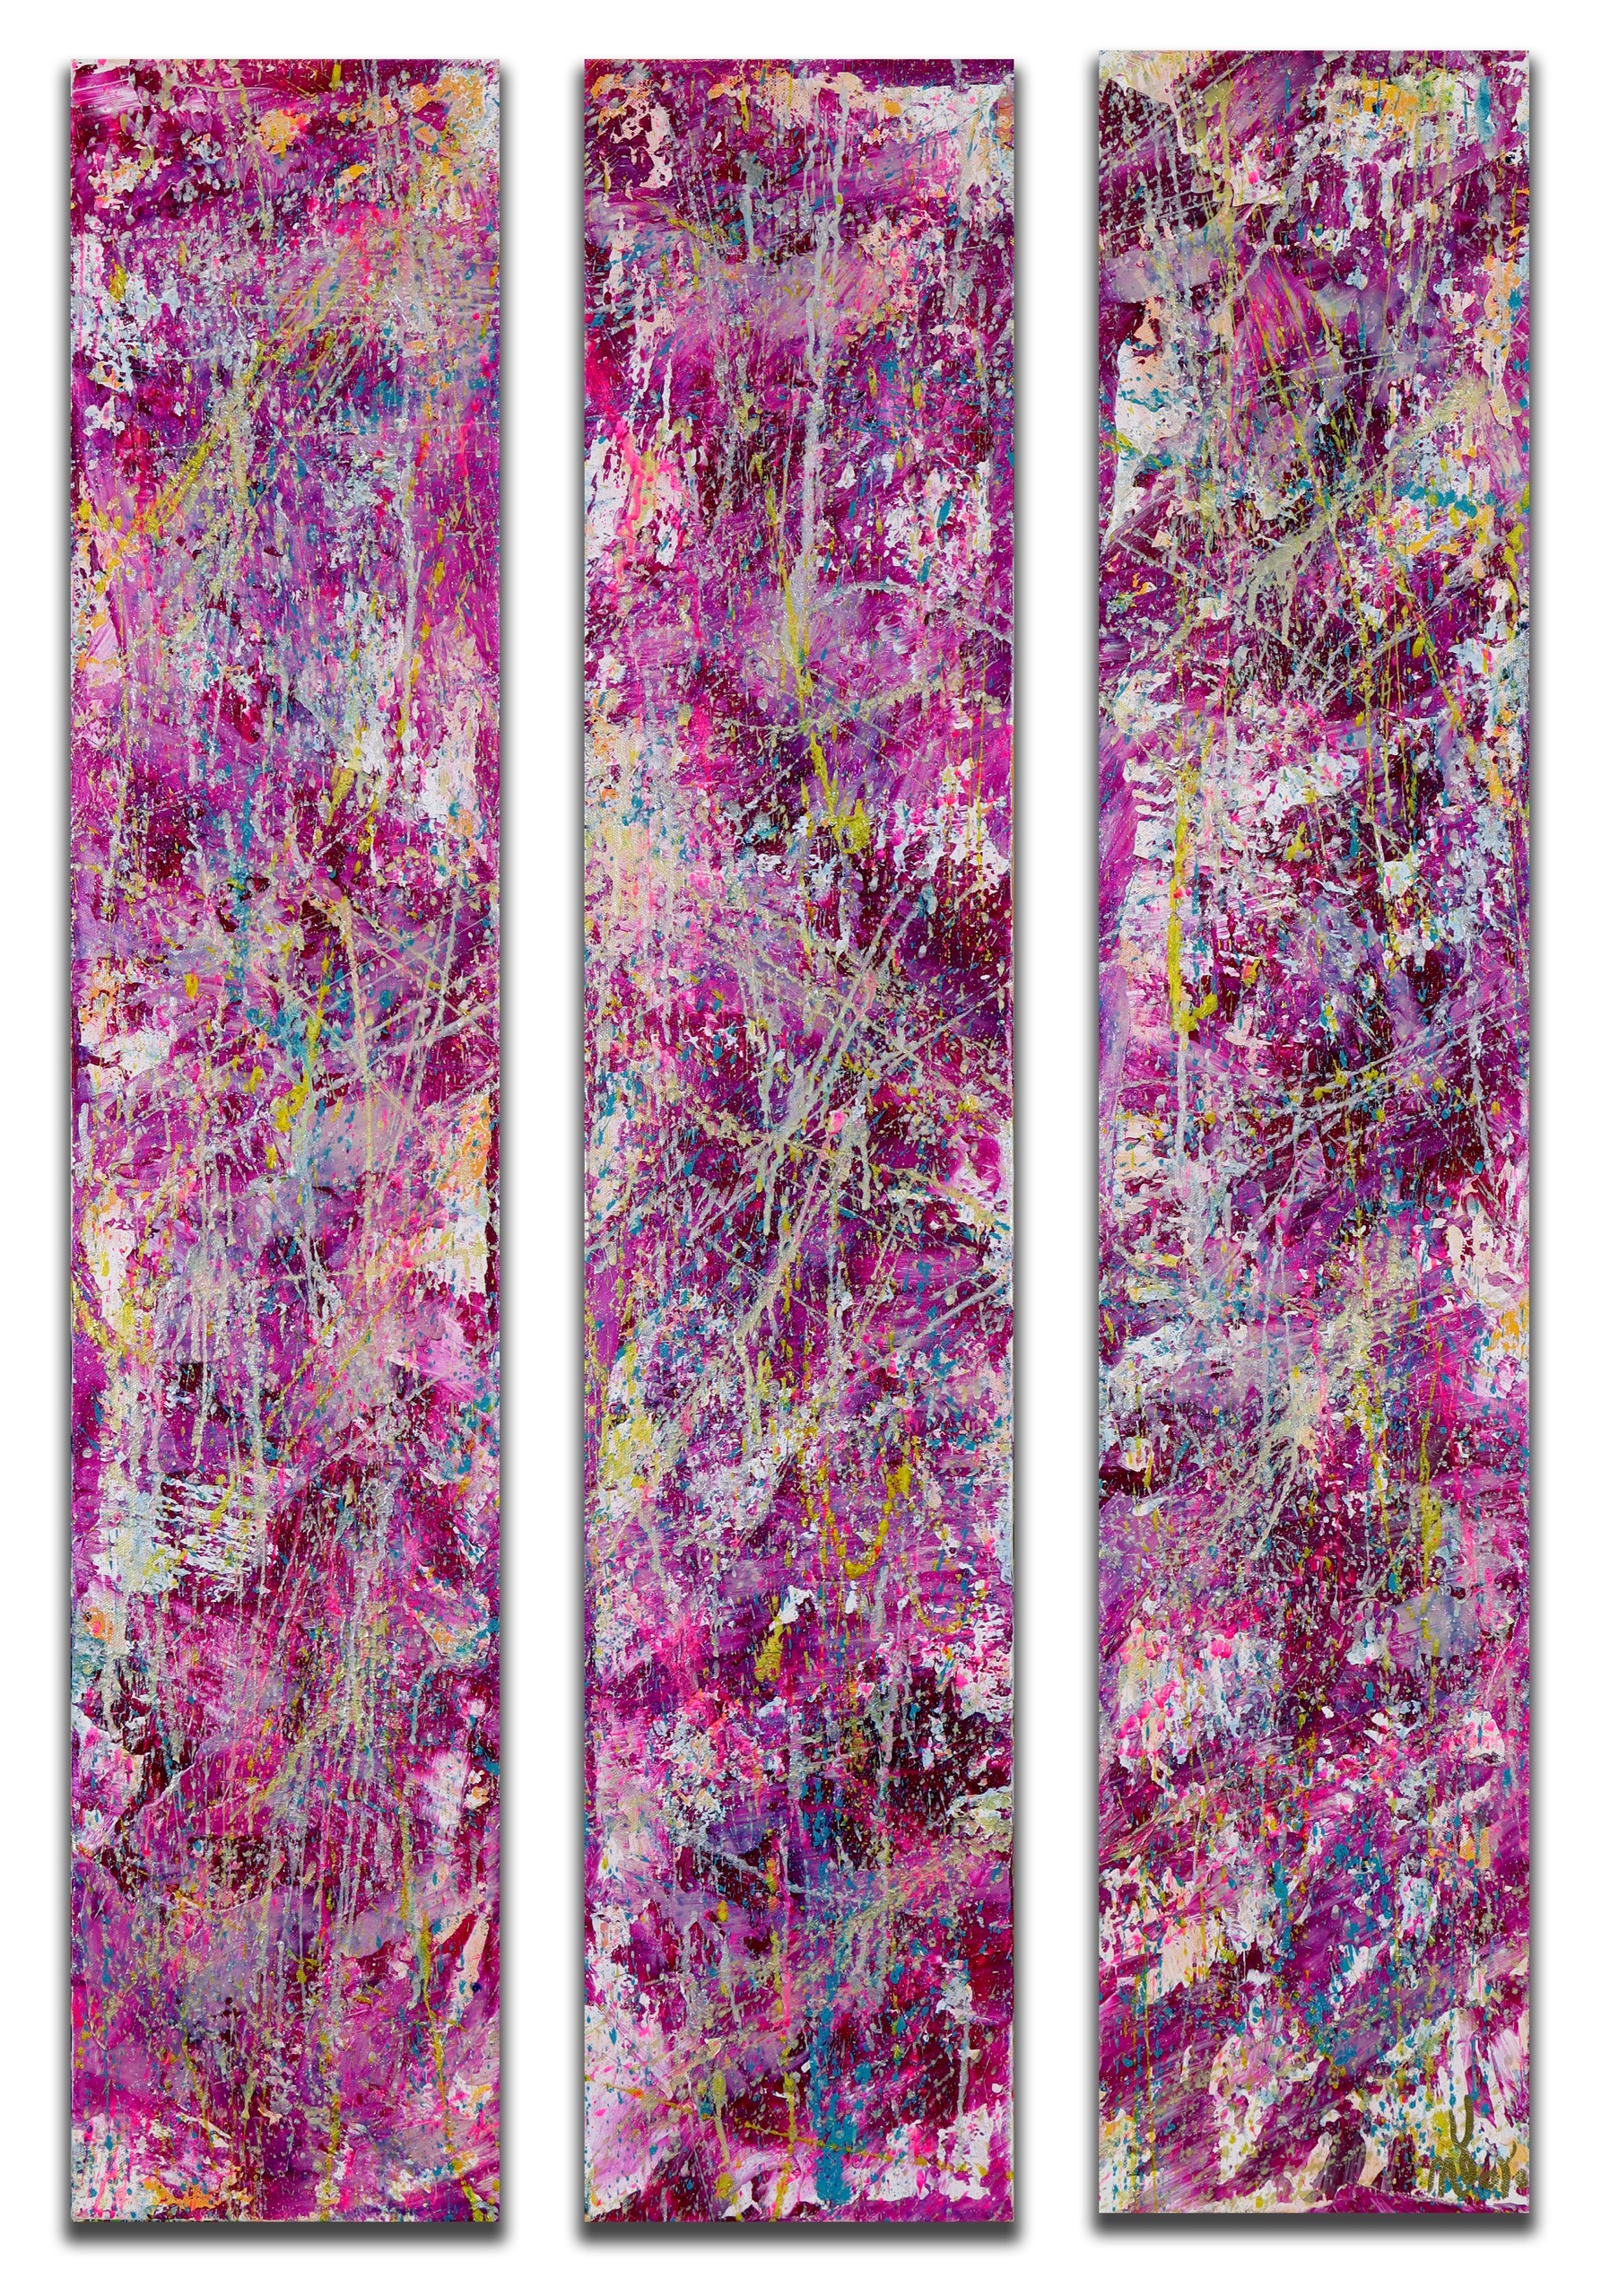 Divided Pink Expressions (2023) | Triptych 24 x 1.5 x 40 inches | Nestor Toro